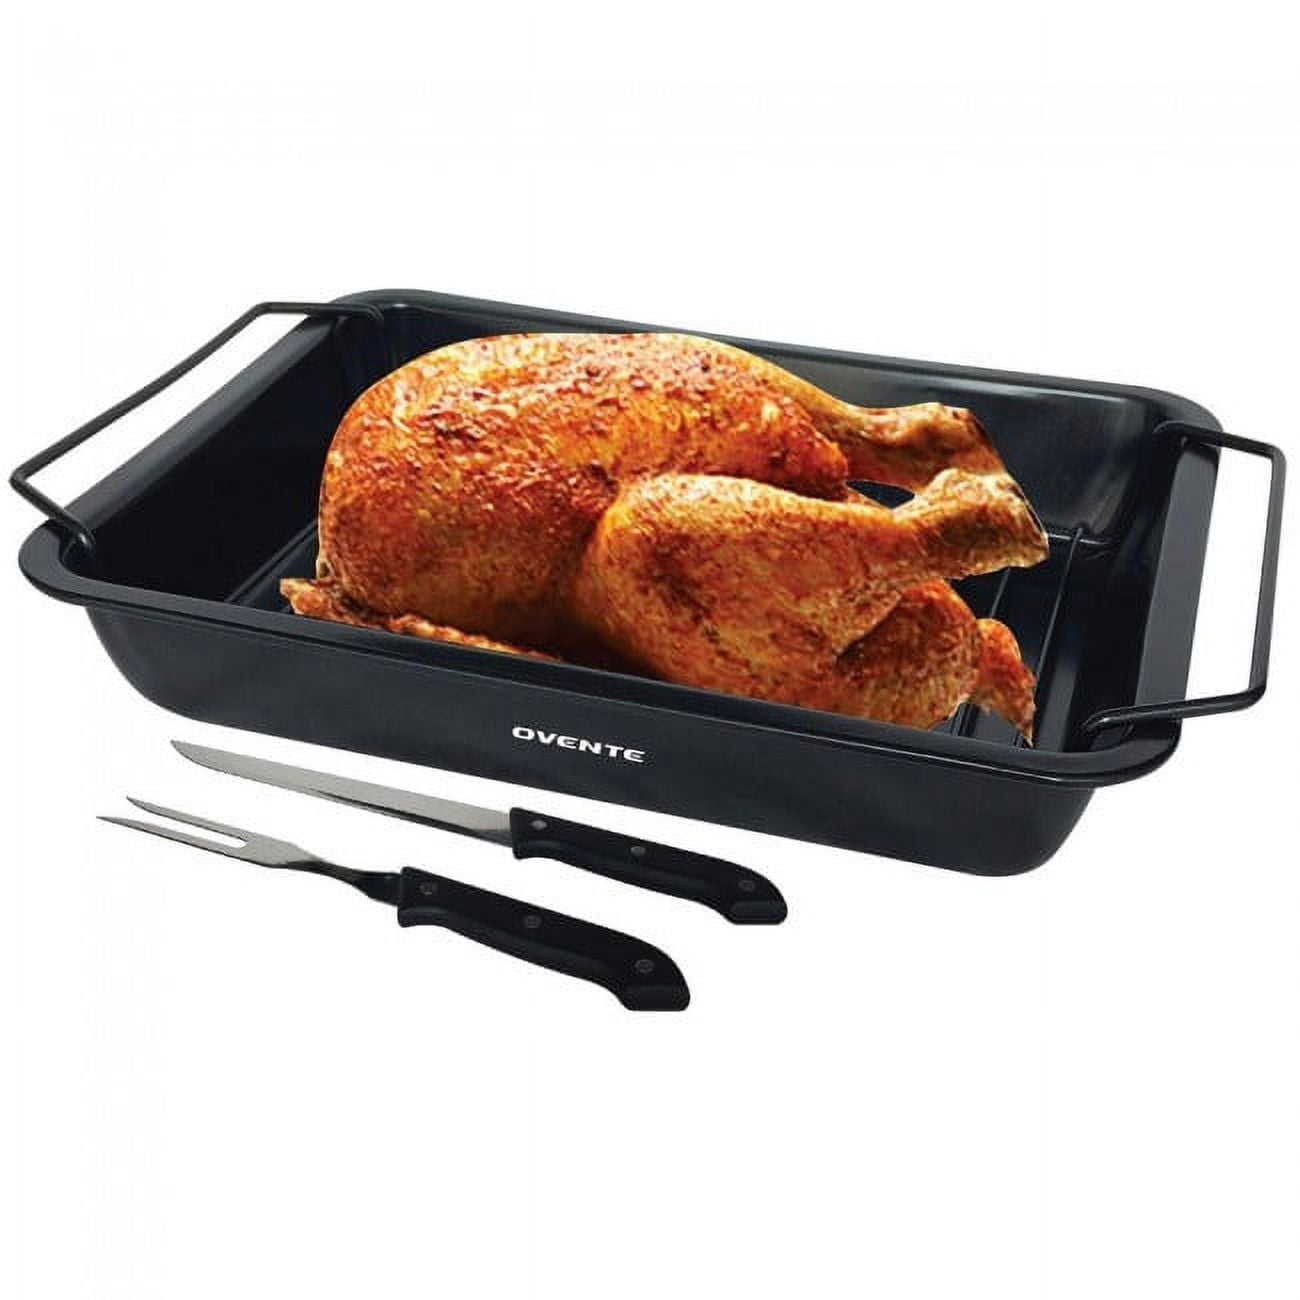  CHEFMADE Roasting Pan with Rack, 11-Inch Non-Stick